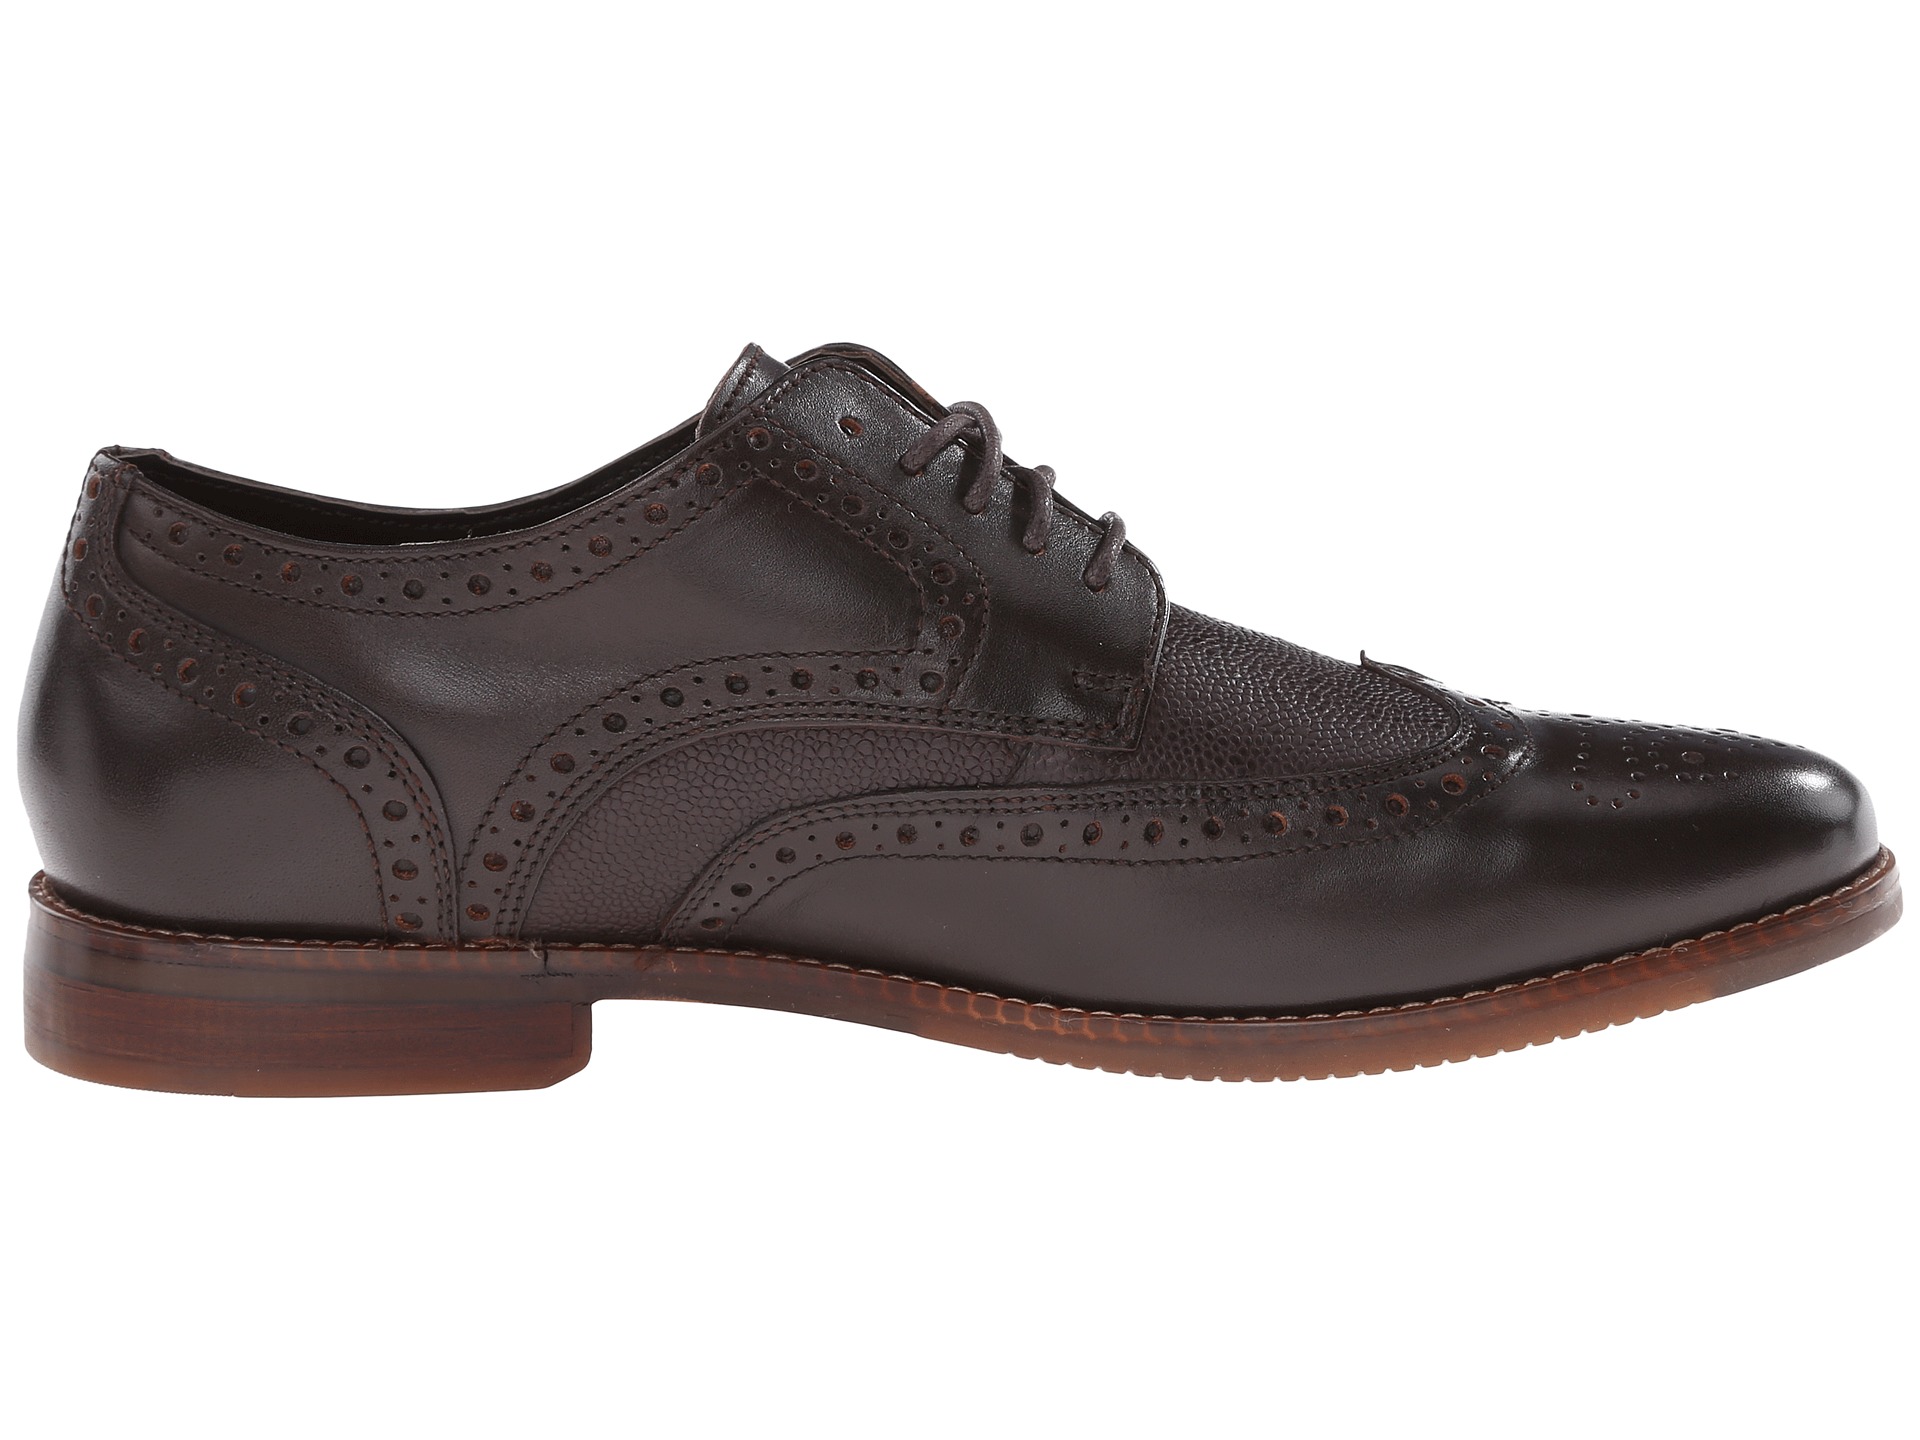 Rockport Style Purpose Wingtip at Zappos.com